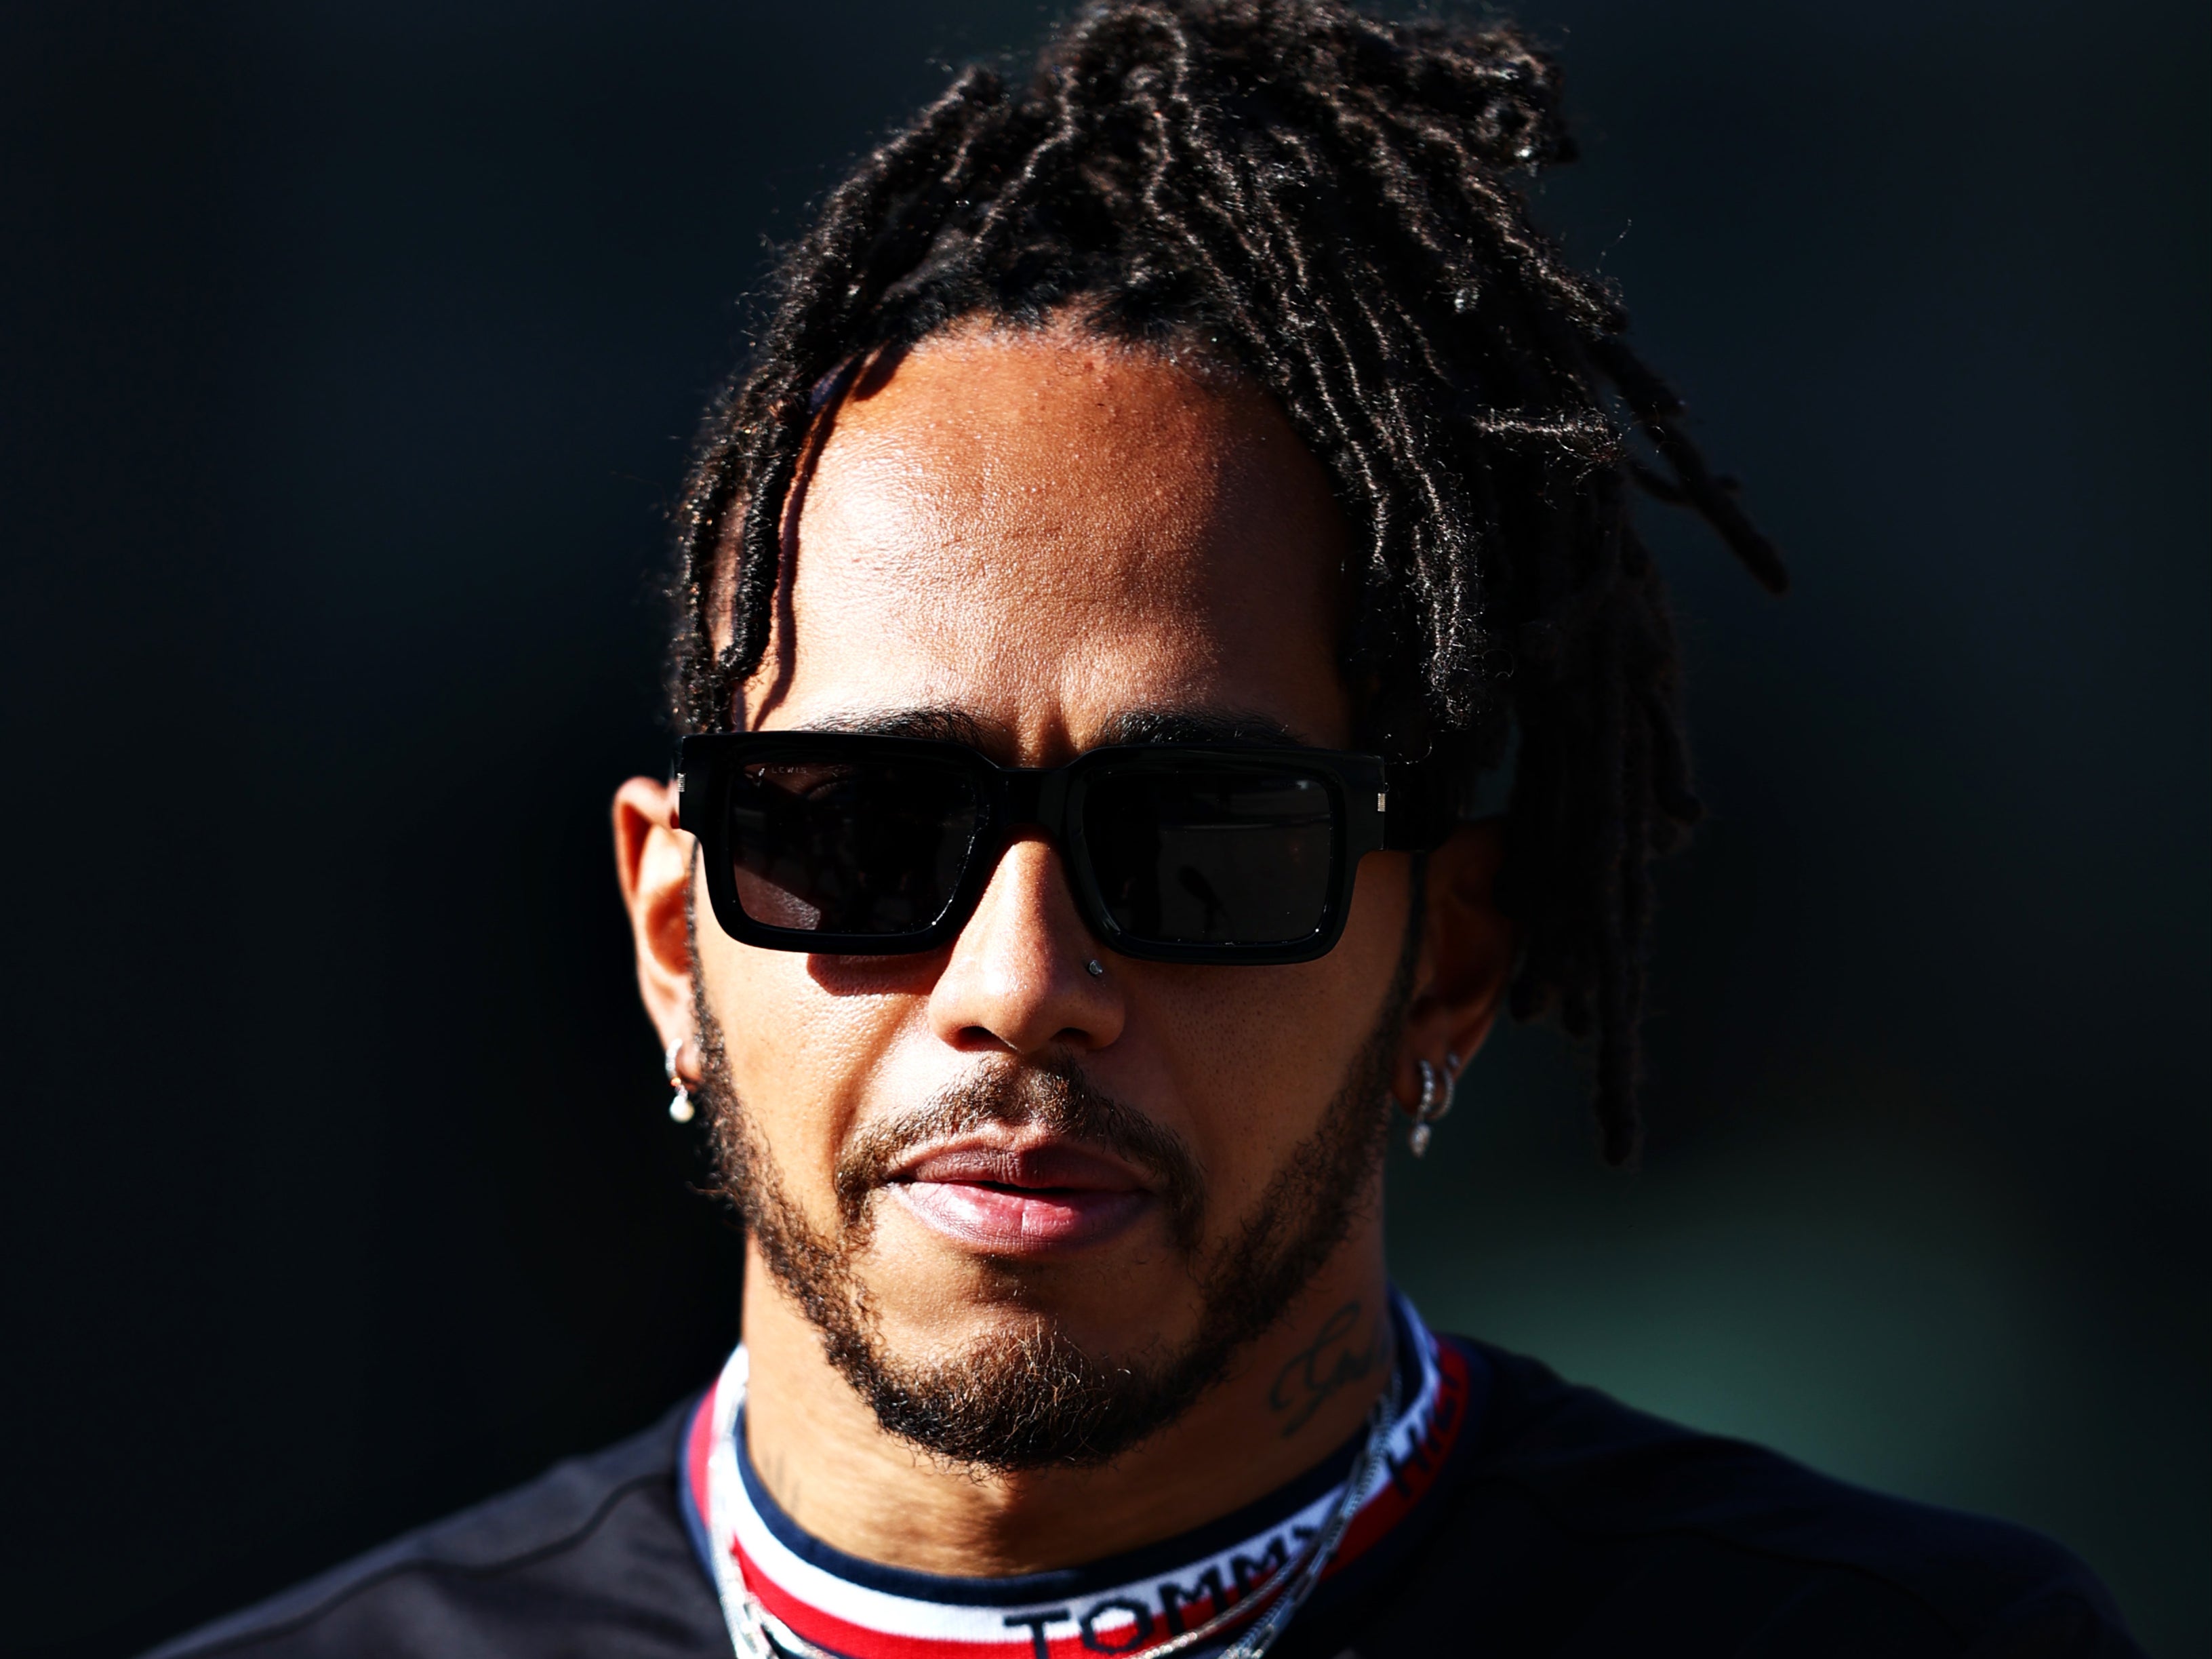 Lewis Hamilton will be penalised on the grid on Sunday